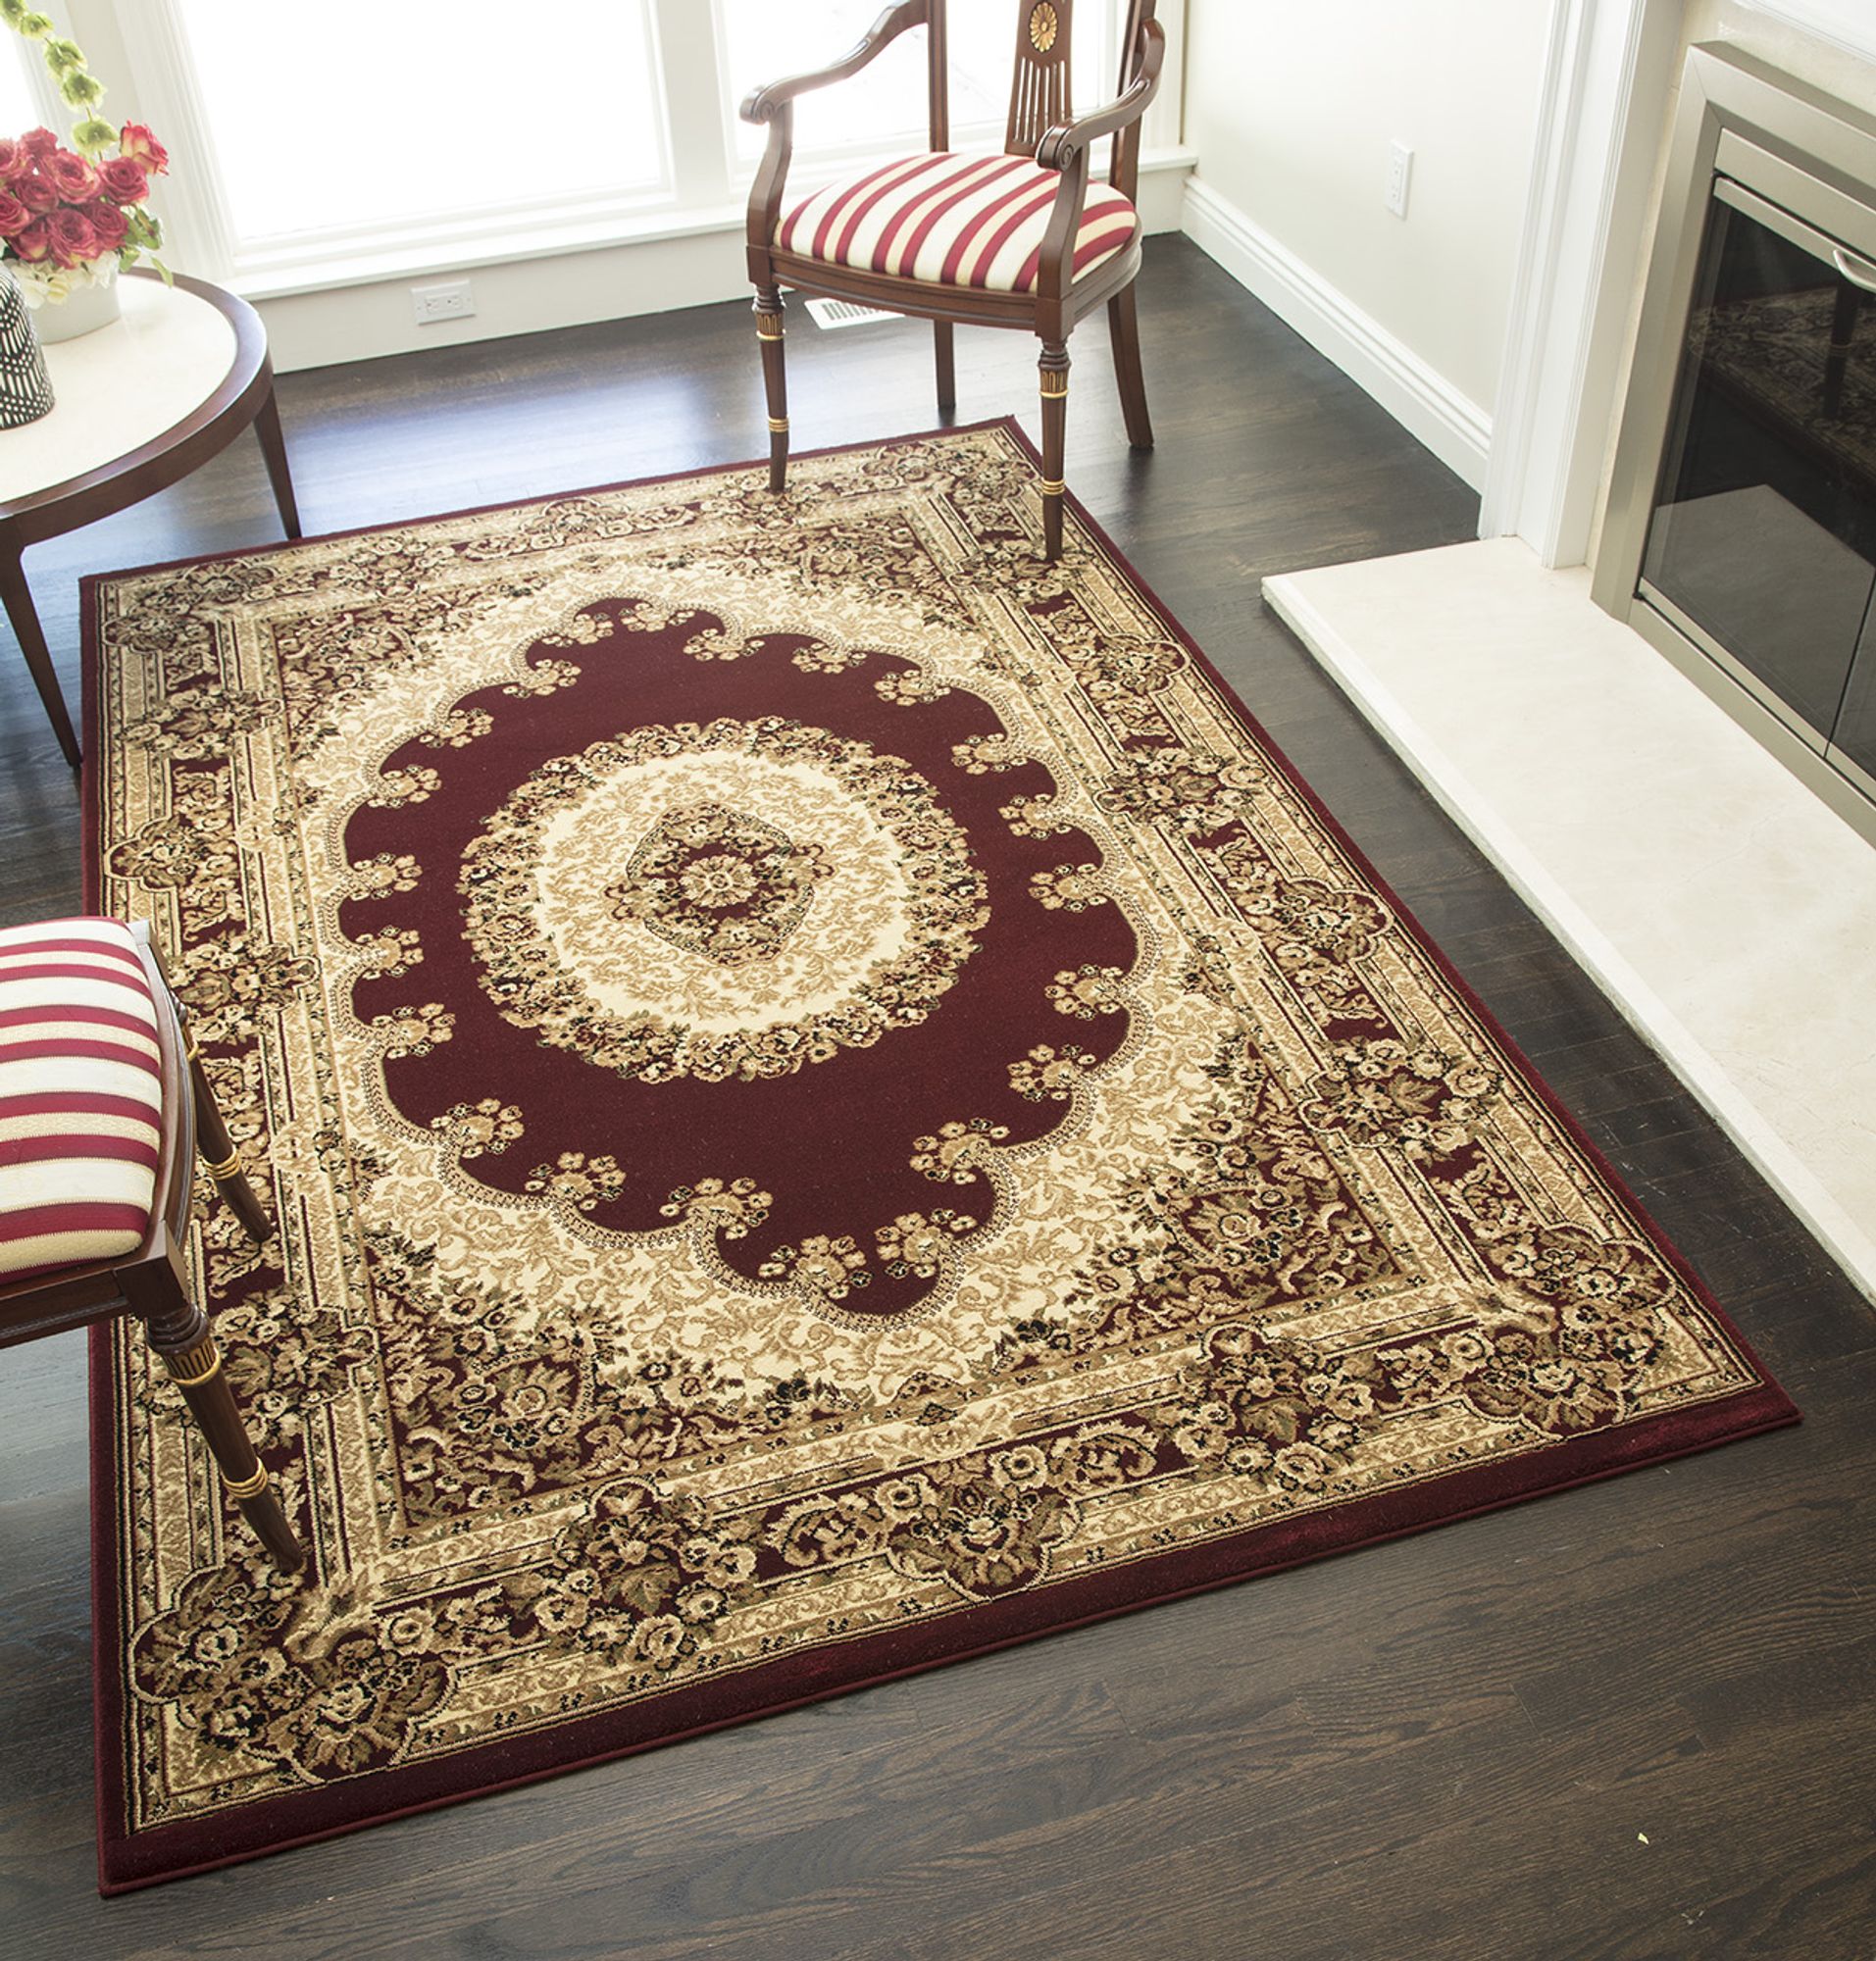 Rugs America Vista 807-RED Kerman Red Oriental Traditional Red Area Rug, 9'10"x13'2" - image 1 of 5